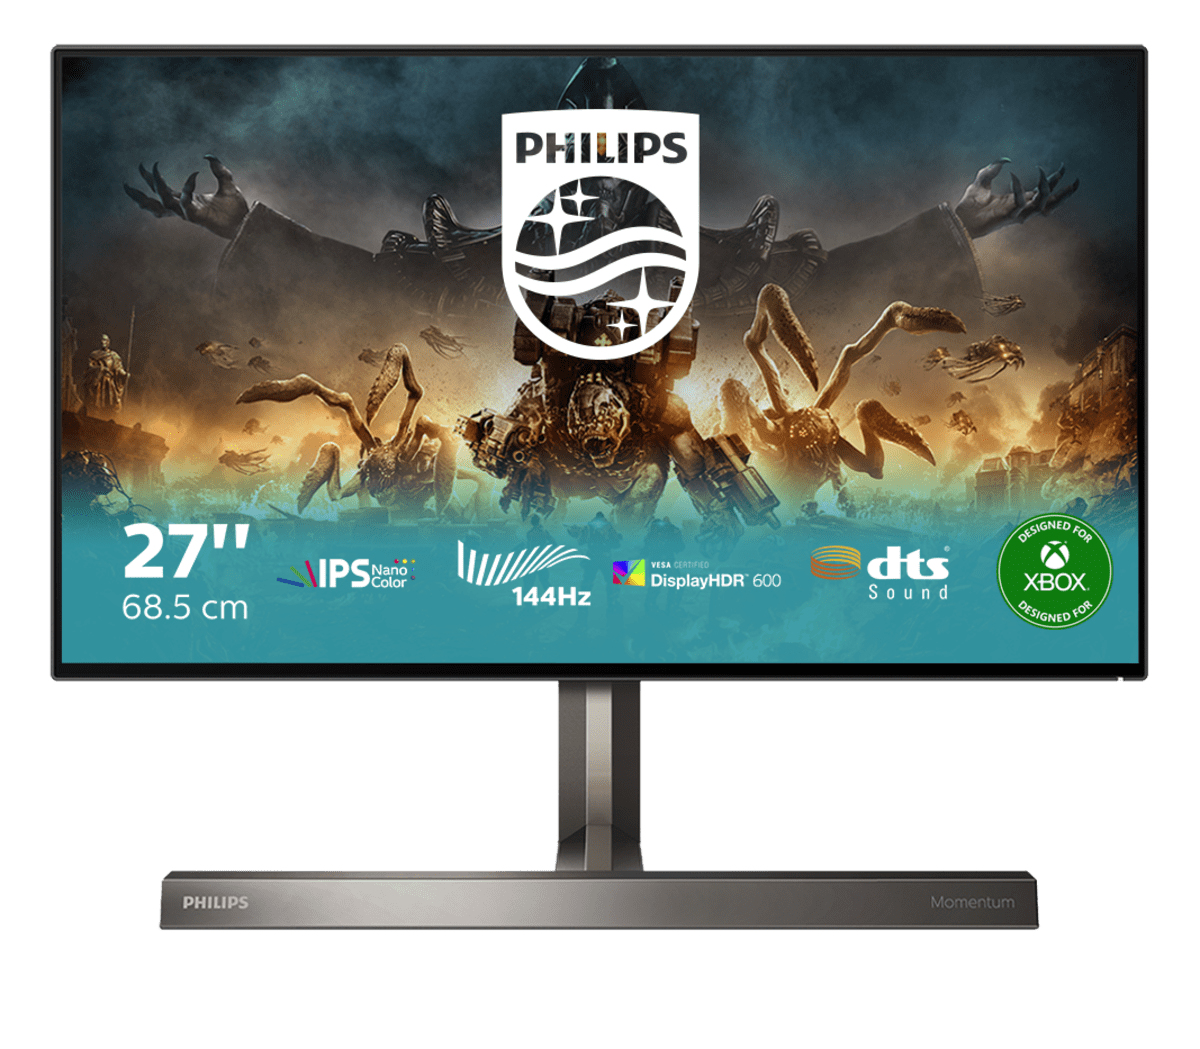 Designed for Xbox 4K HDR display with Ambiglow